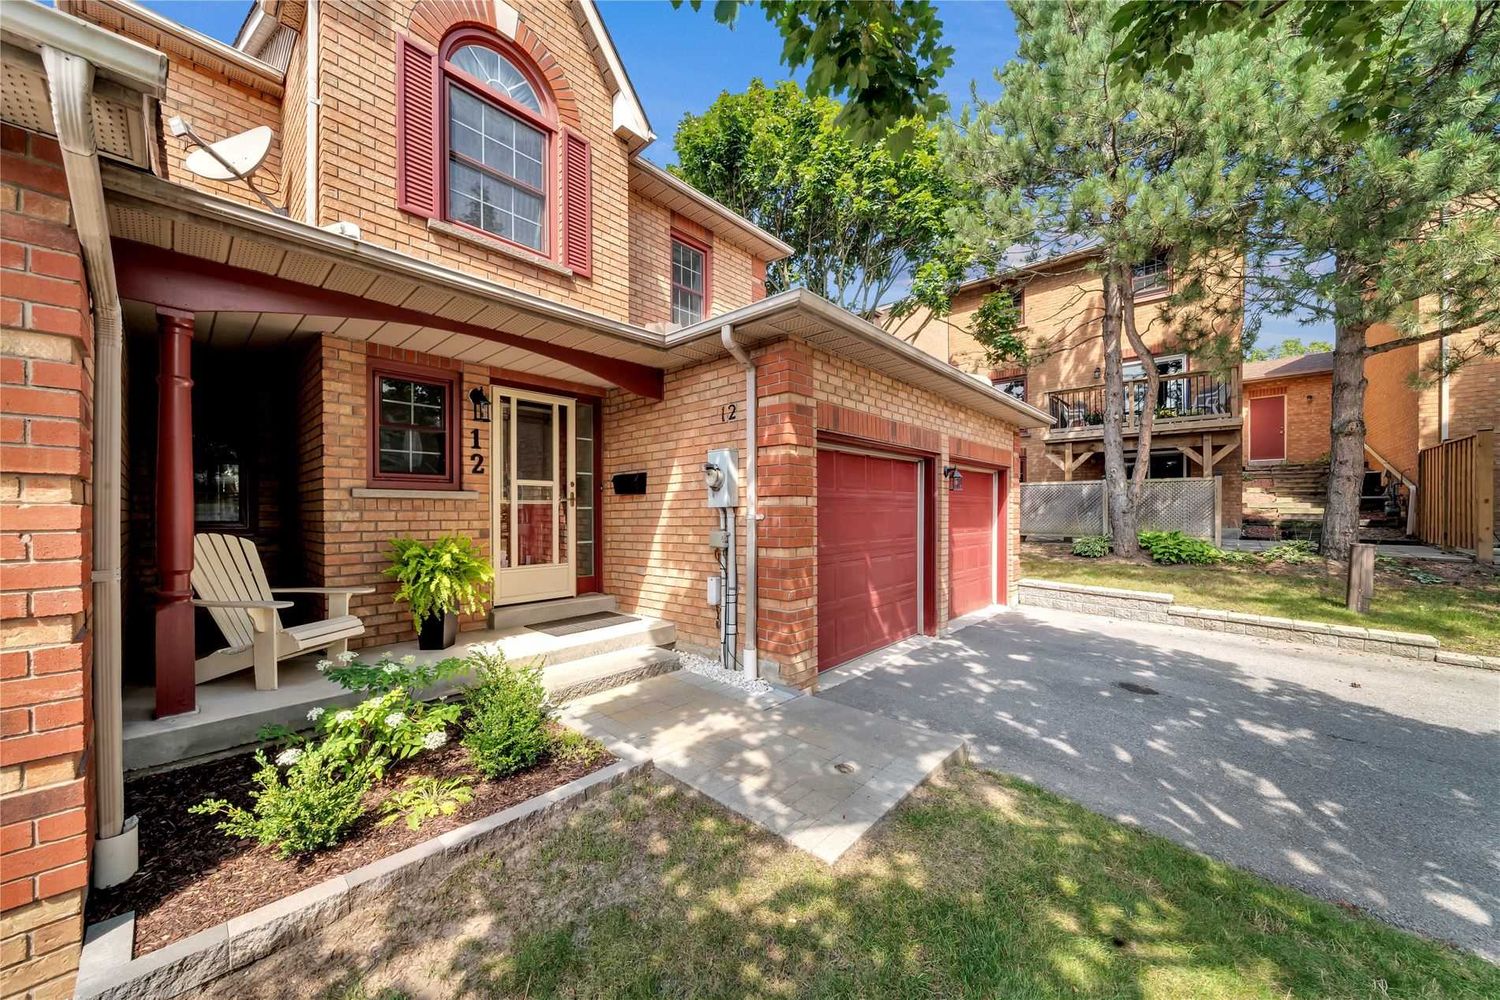 1610 Crawforth Street. 1610 Crawforth Townhomes is located in  Whitby, Toronto - image #2 of 2